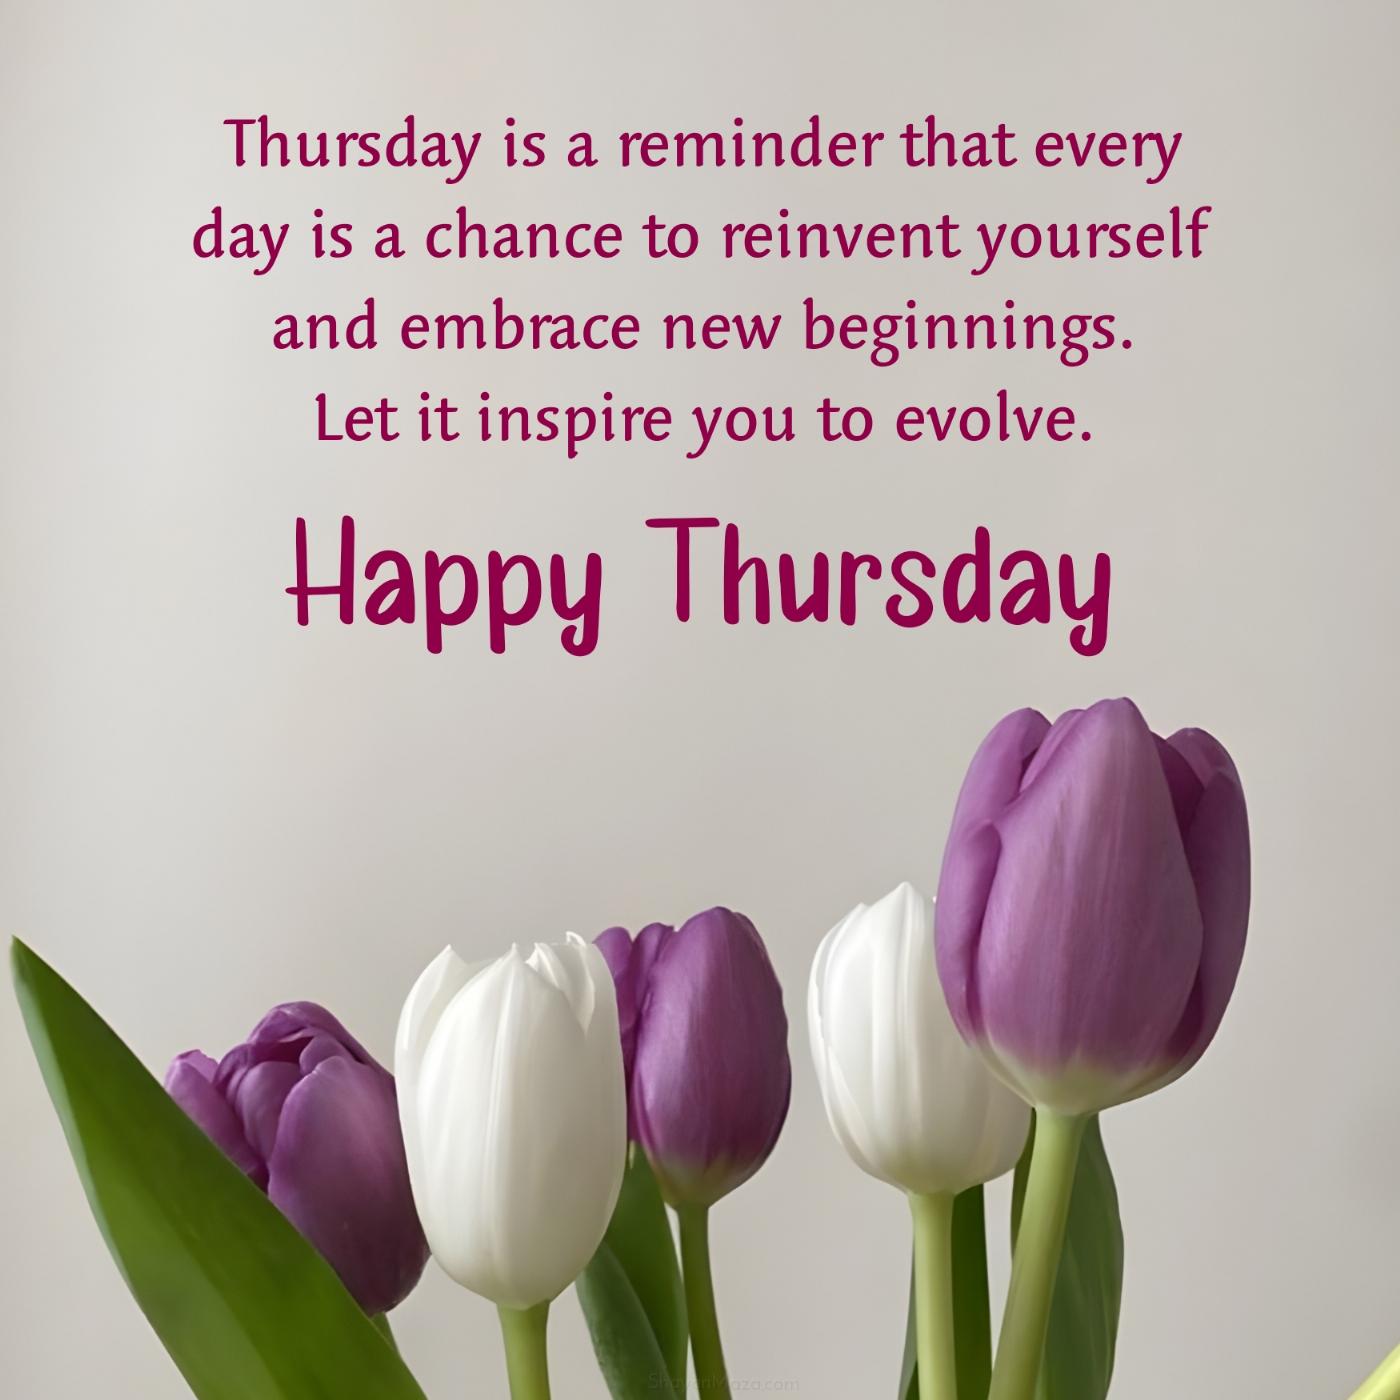 Thursday is a reminder that every day is a chance to reinvent yourself